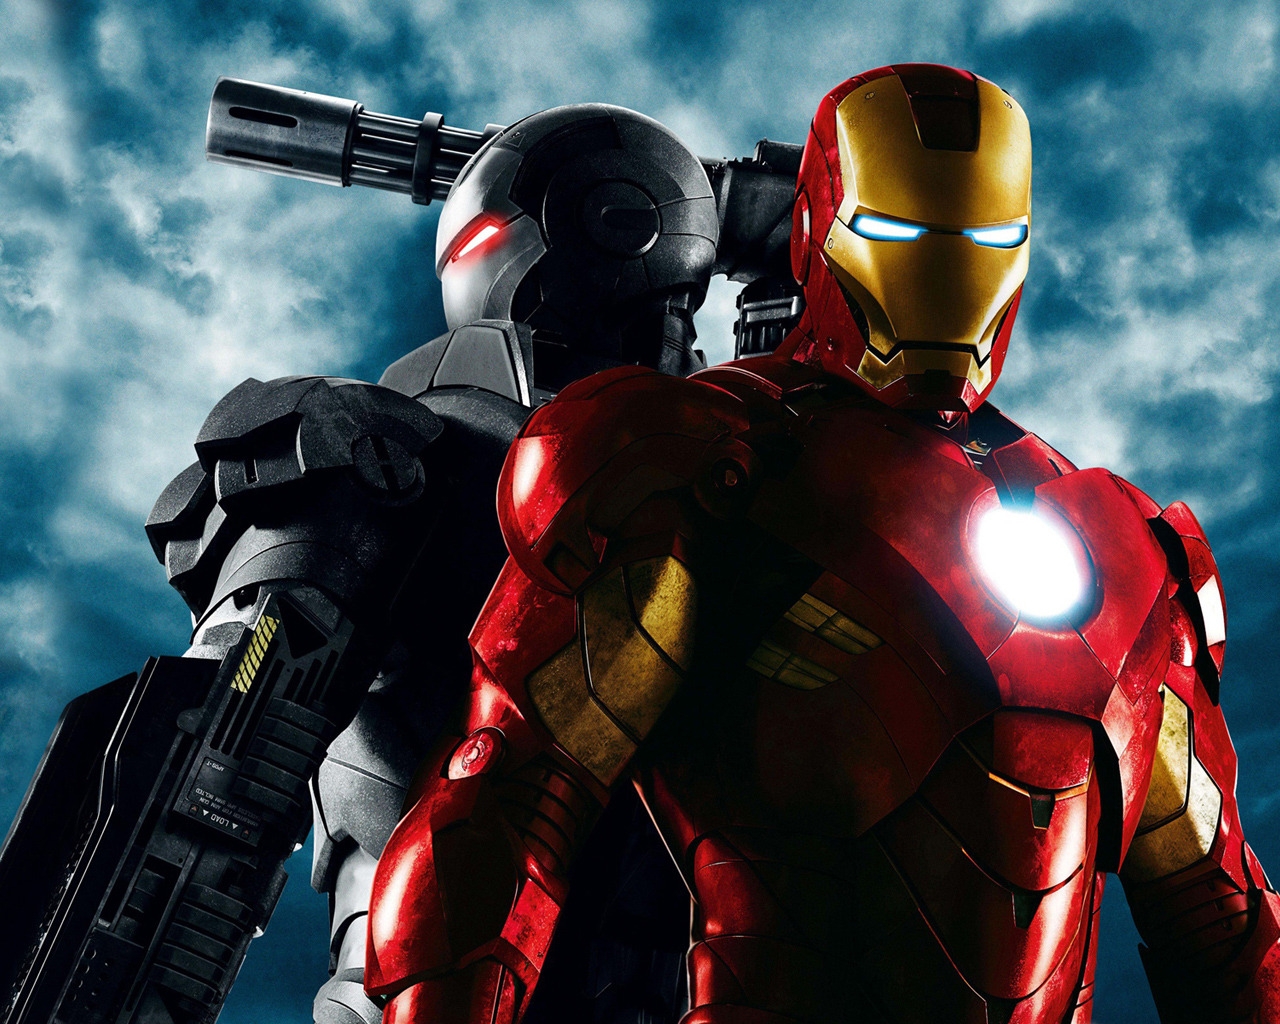 Iron Man 2 Poster for 1280 x 1024 resolution